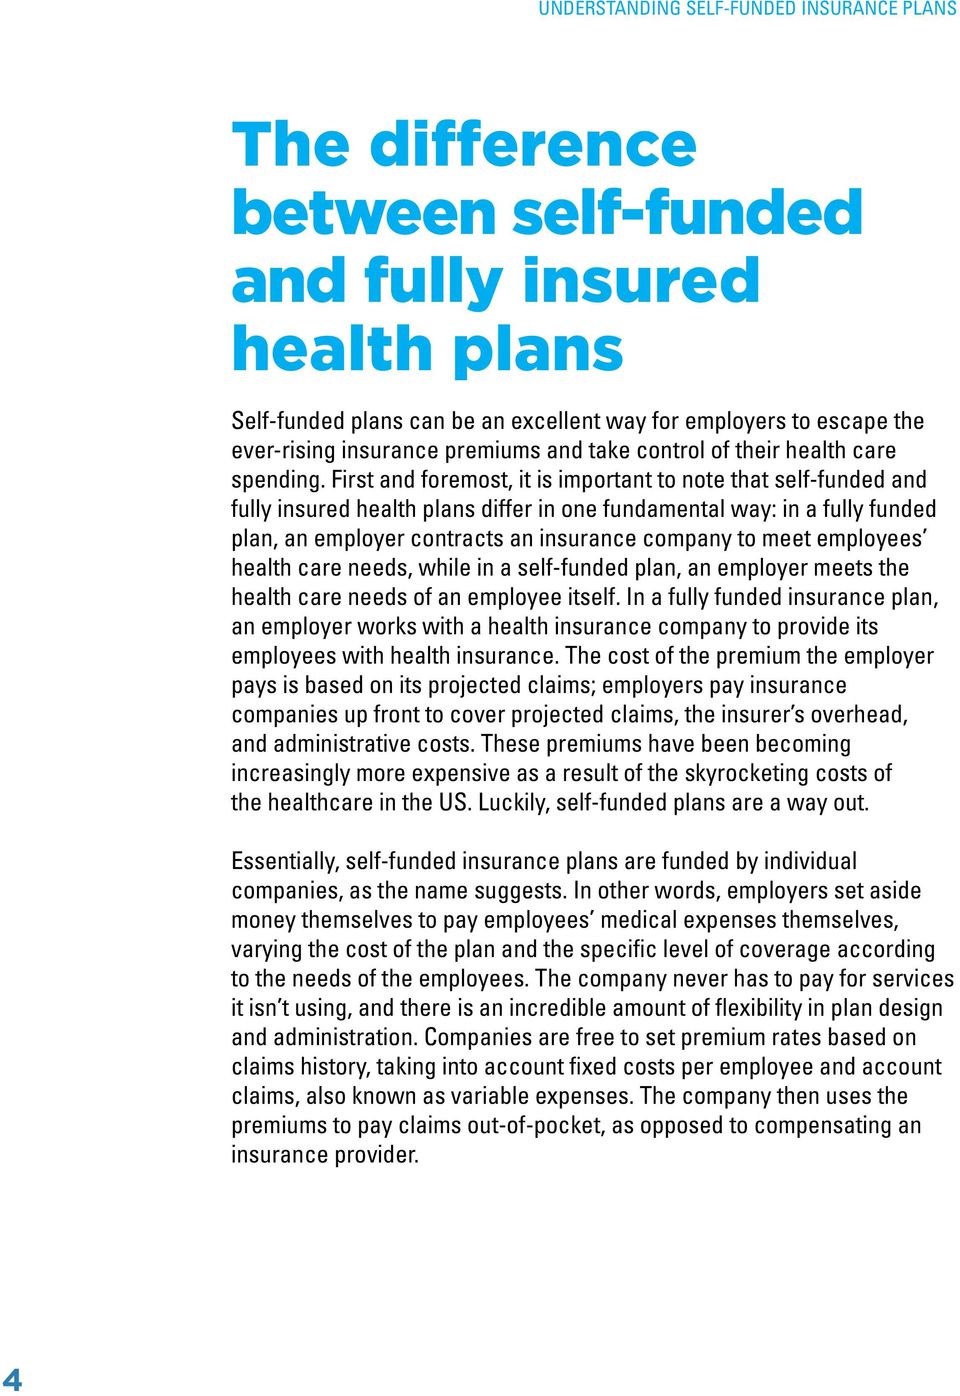 First and foremost, it is important to note that self-funded and fully insured health plans differ in one fundamental way: in a fully funded plan, an employer contracts an insurance company to meet